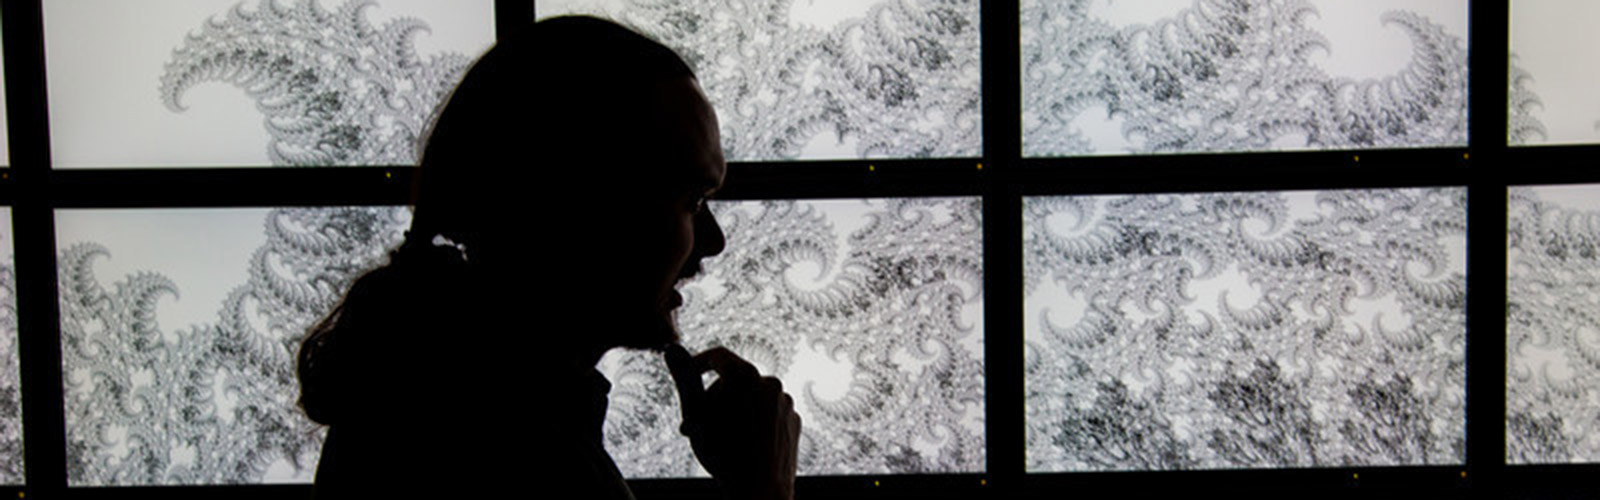 Orion Lawlor stands in front of a random fractal design projected on the bioinformatics powerwall.